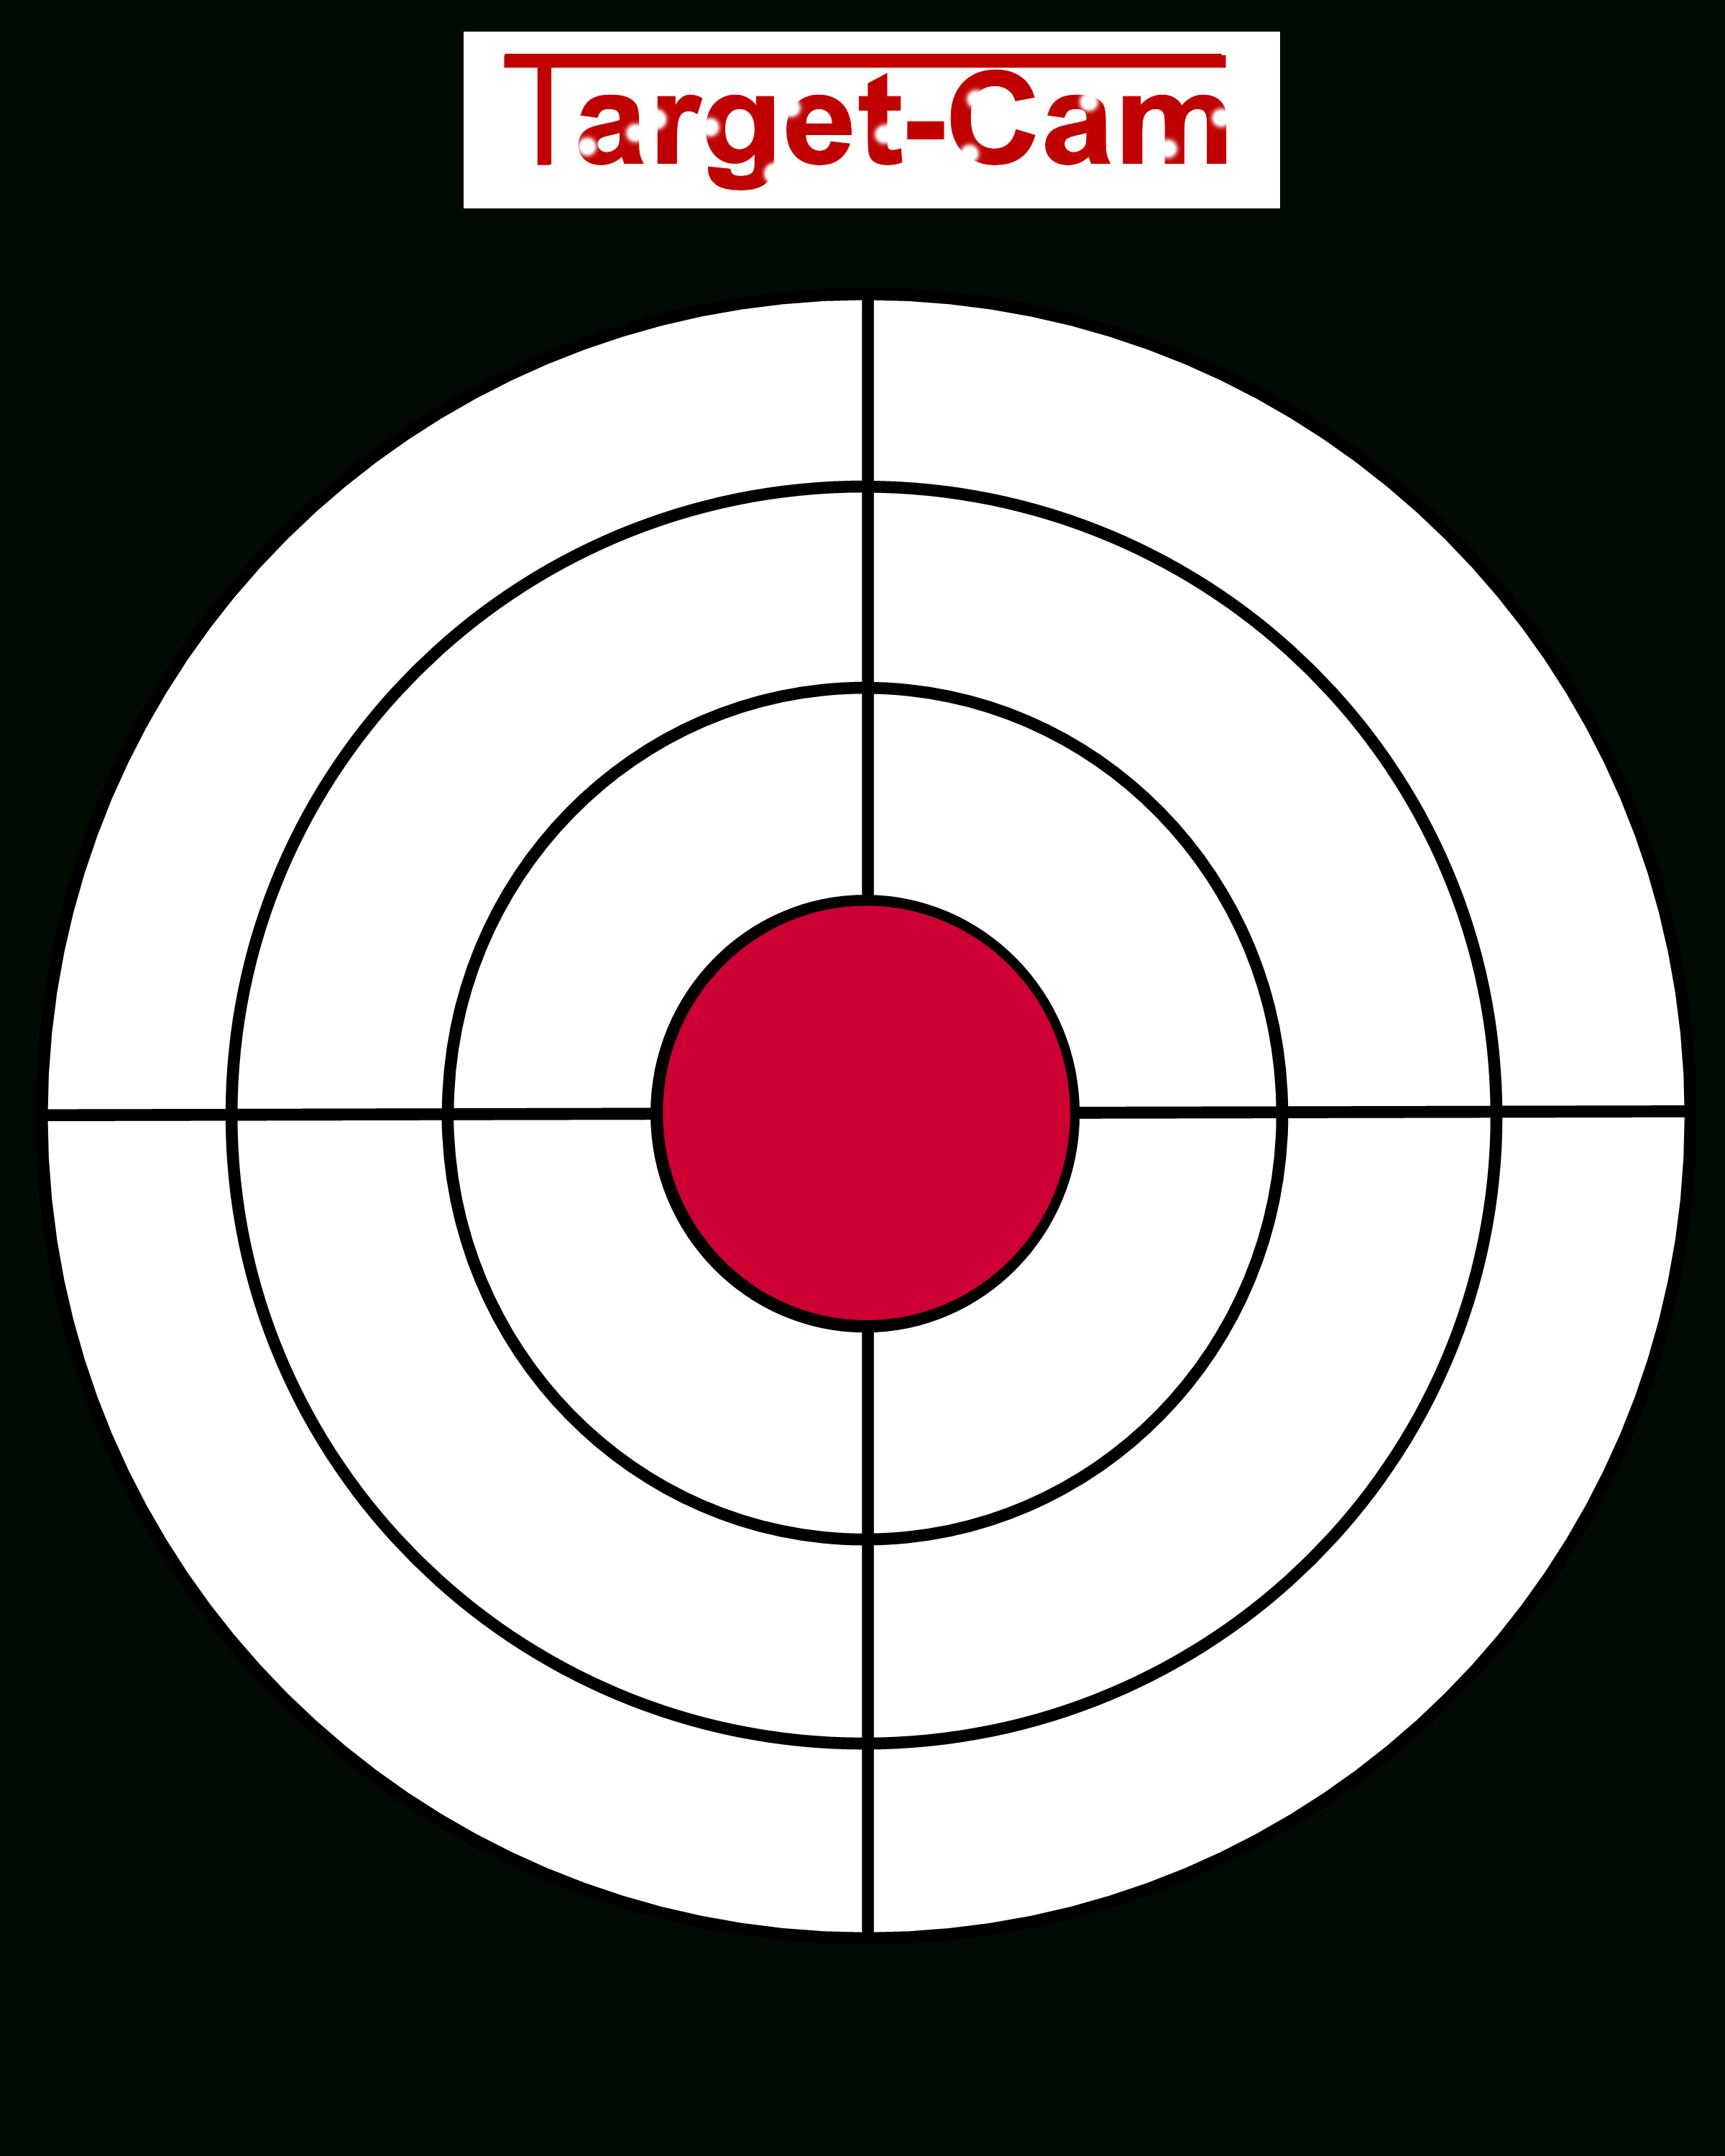 Free Gun Targets To Print | New &amp;quot;target-Cam&amp;quot; Rifle And Hand Gun - Free Printable Targets For Shooting Practice